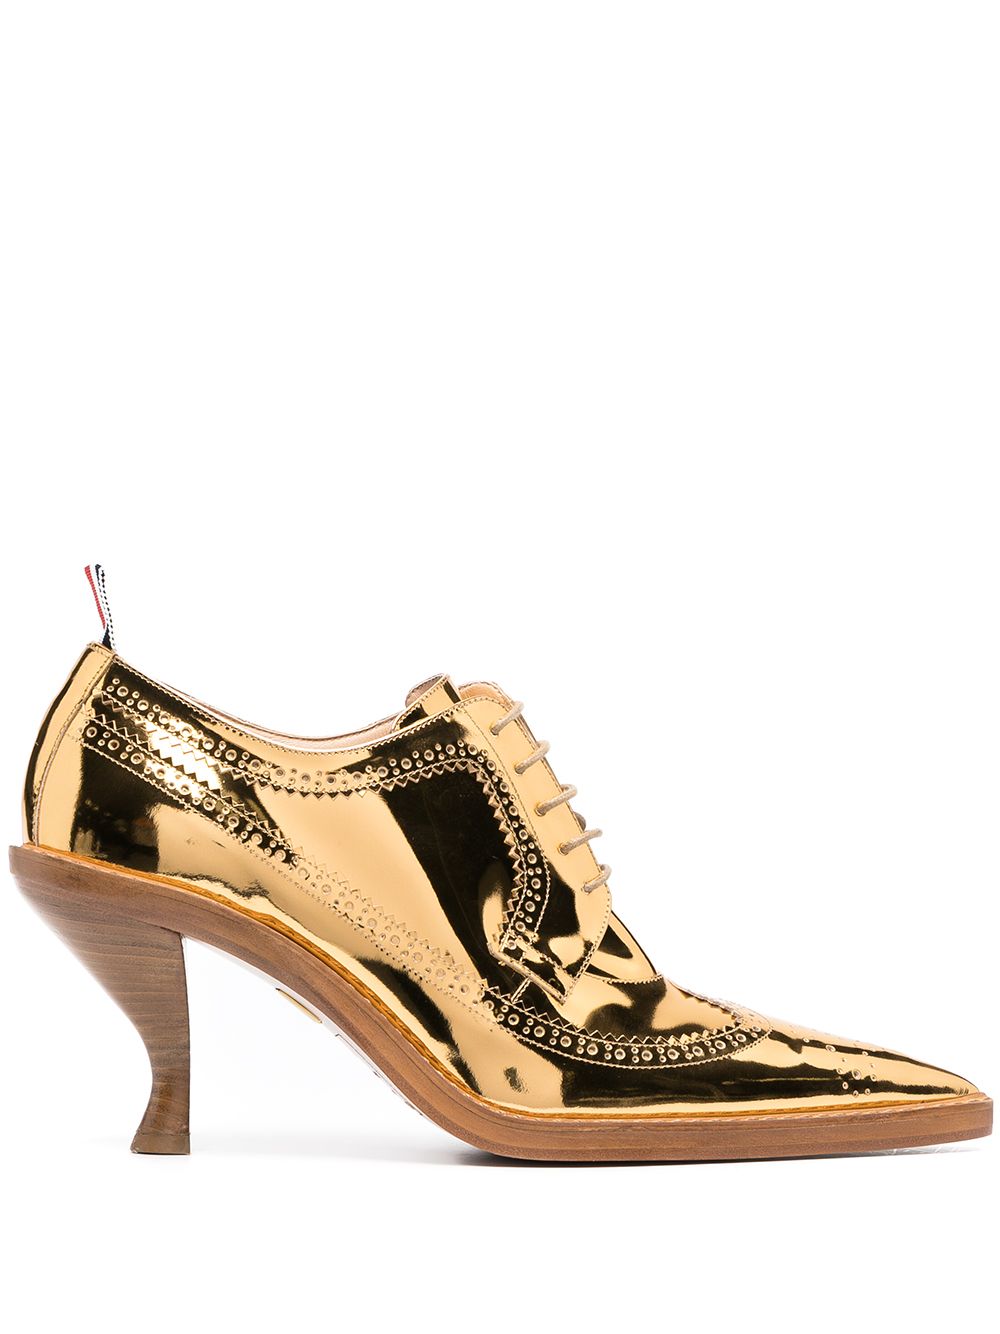 Thom Browne metallic longwing brogues with sculpted heel - Gold von Thom Browne